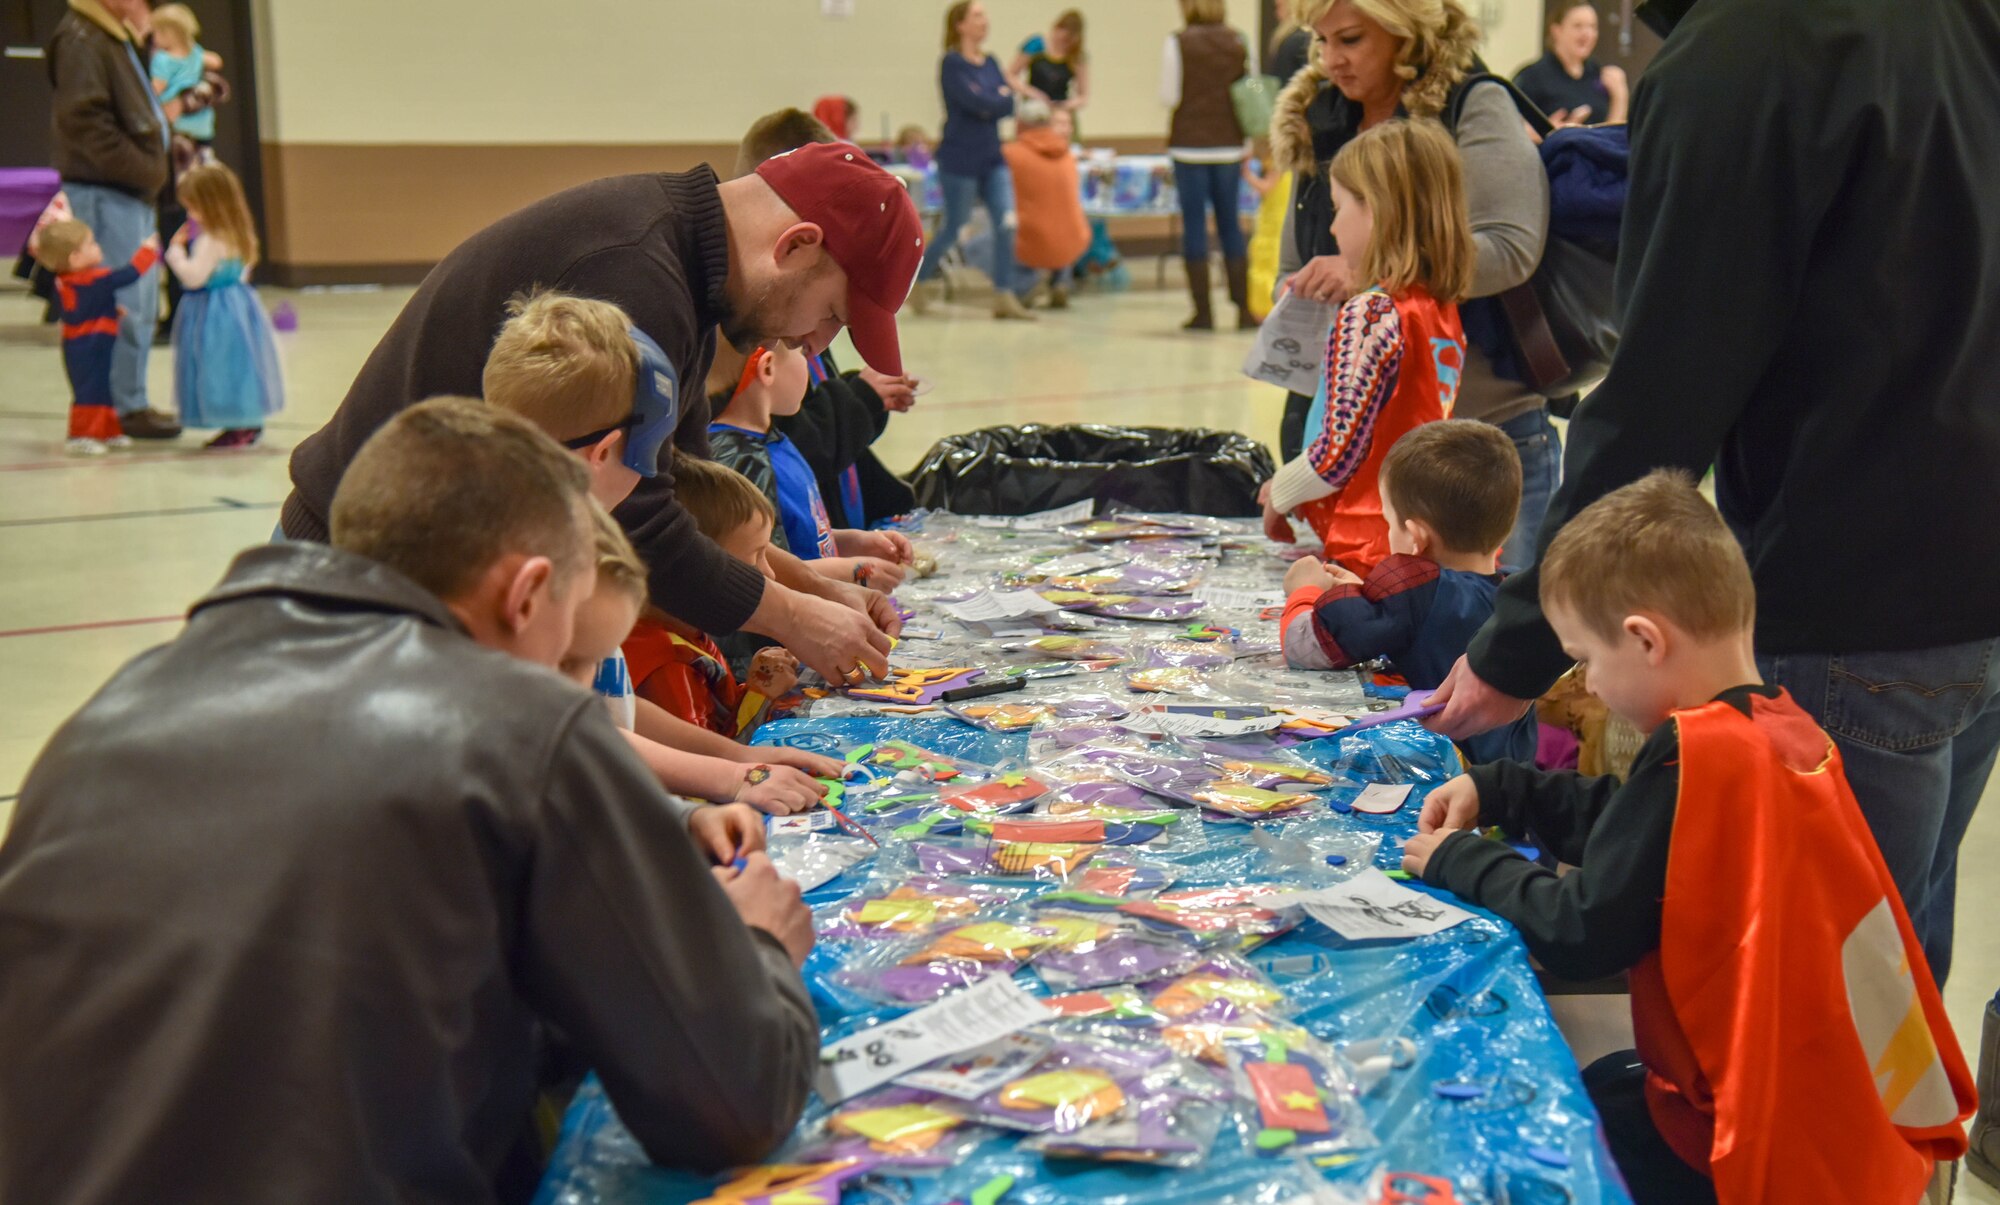 South Dakota National Guard members and their kids creates different masks during the Princess and Super Hero Day Camp April 7, 2018, at the National Guard Armory, Sioux Falls, S.D.